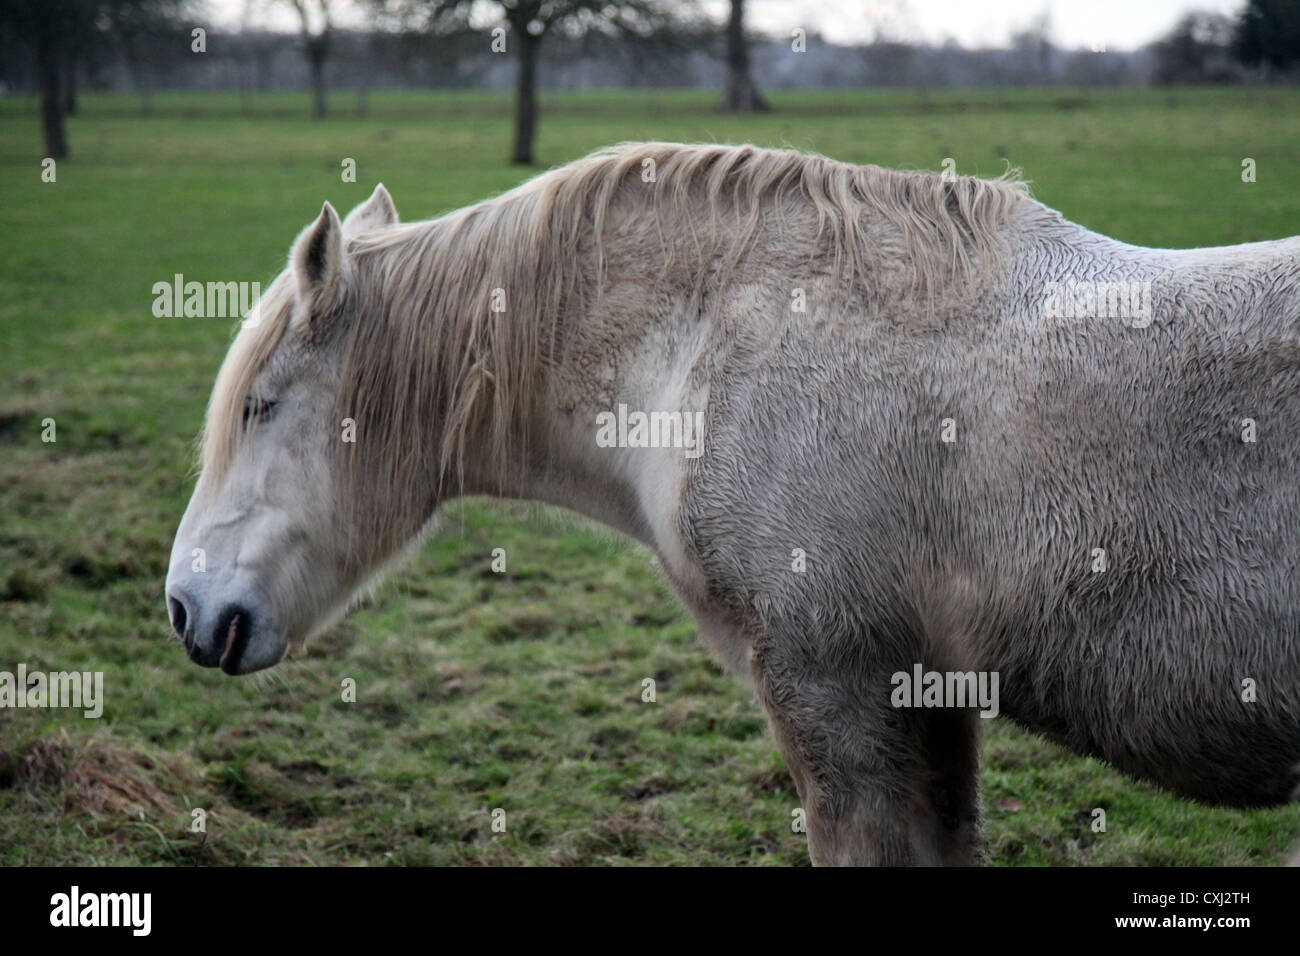 It' a photo of a Cart Horse or Horse Power that is white and is in a green field full of fresh grass in the France countryside Stock Photo